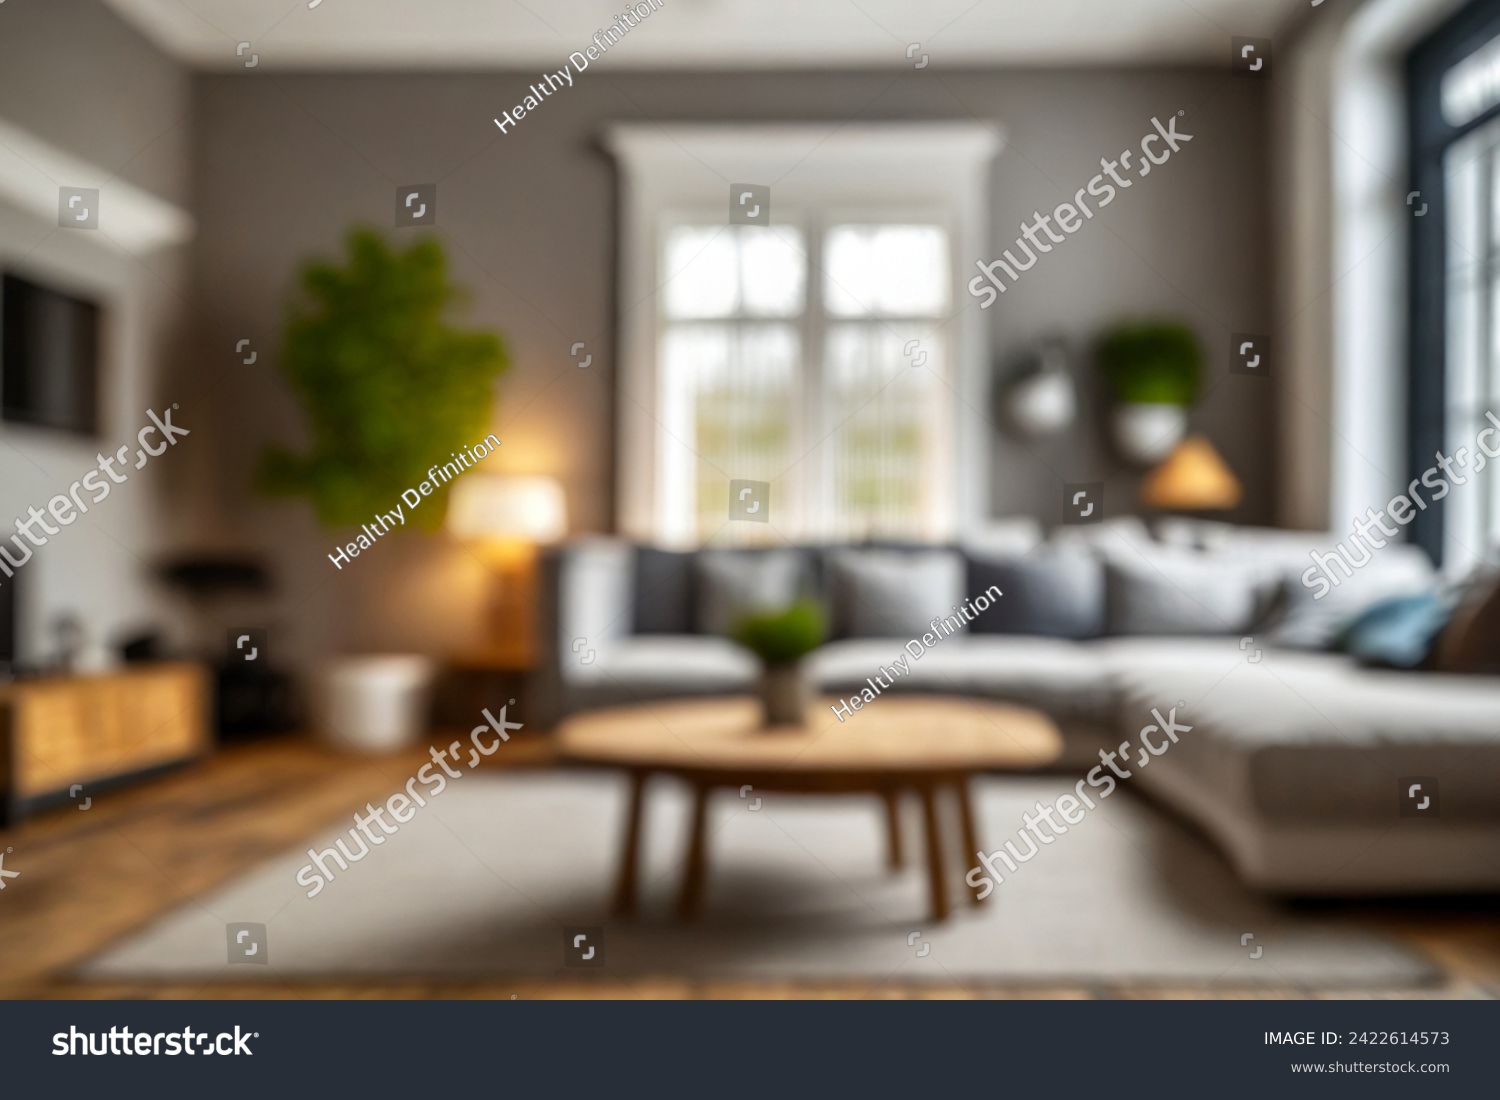 Blurred view of modern living room with sofa and soft bench. room interior with  couch, armchair and coffee table or shelving units. stylish living room. comfortable workplace near big window. #2422614573